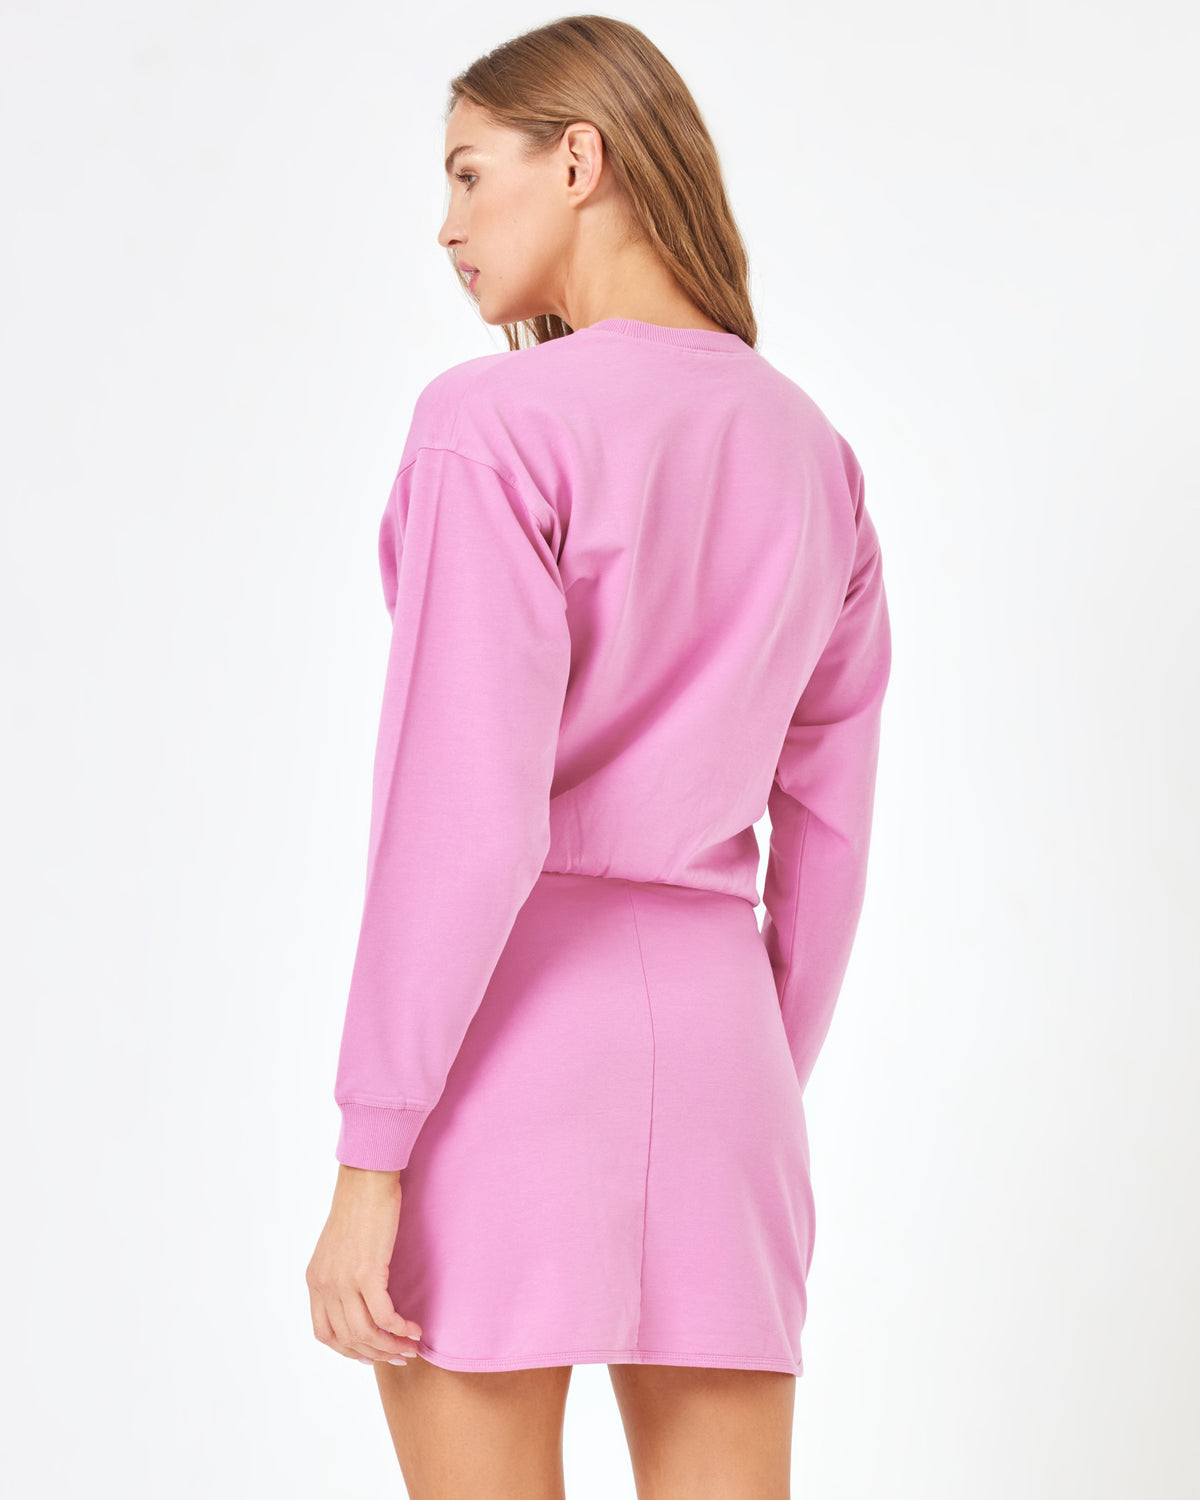 LSPACE X Anthropologie Groove Dress - Pink Lady Pink Lady | Model: Daria (size: S)